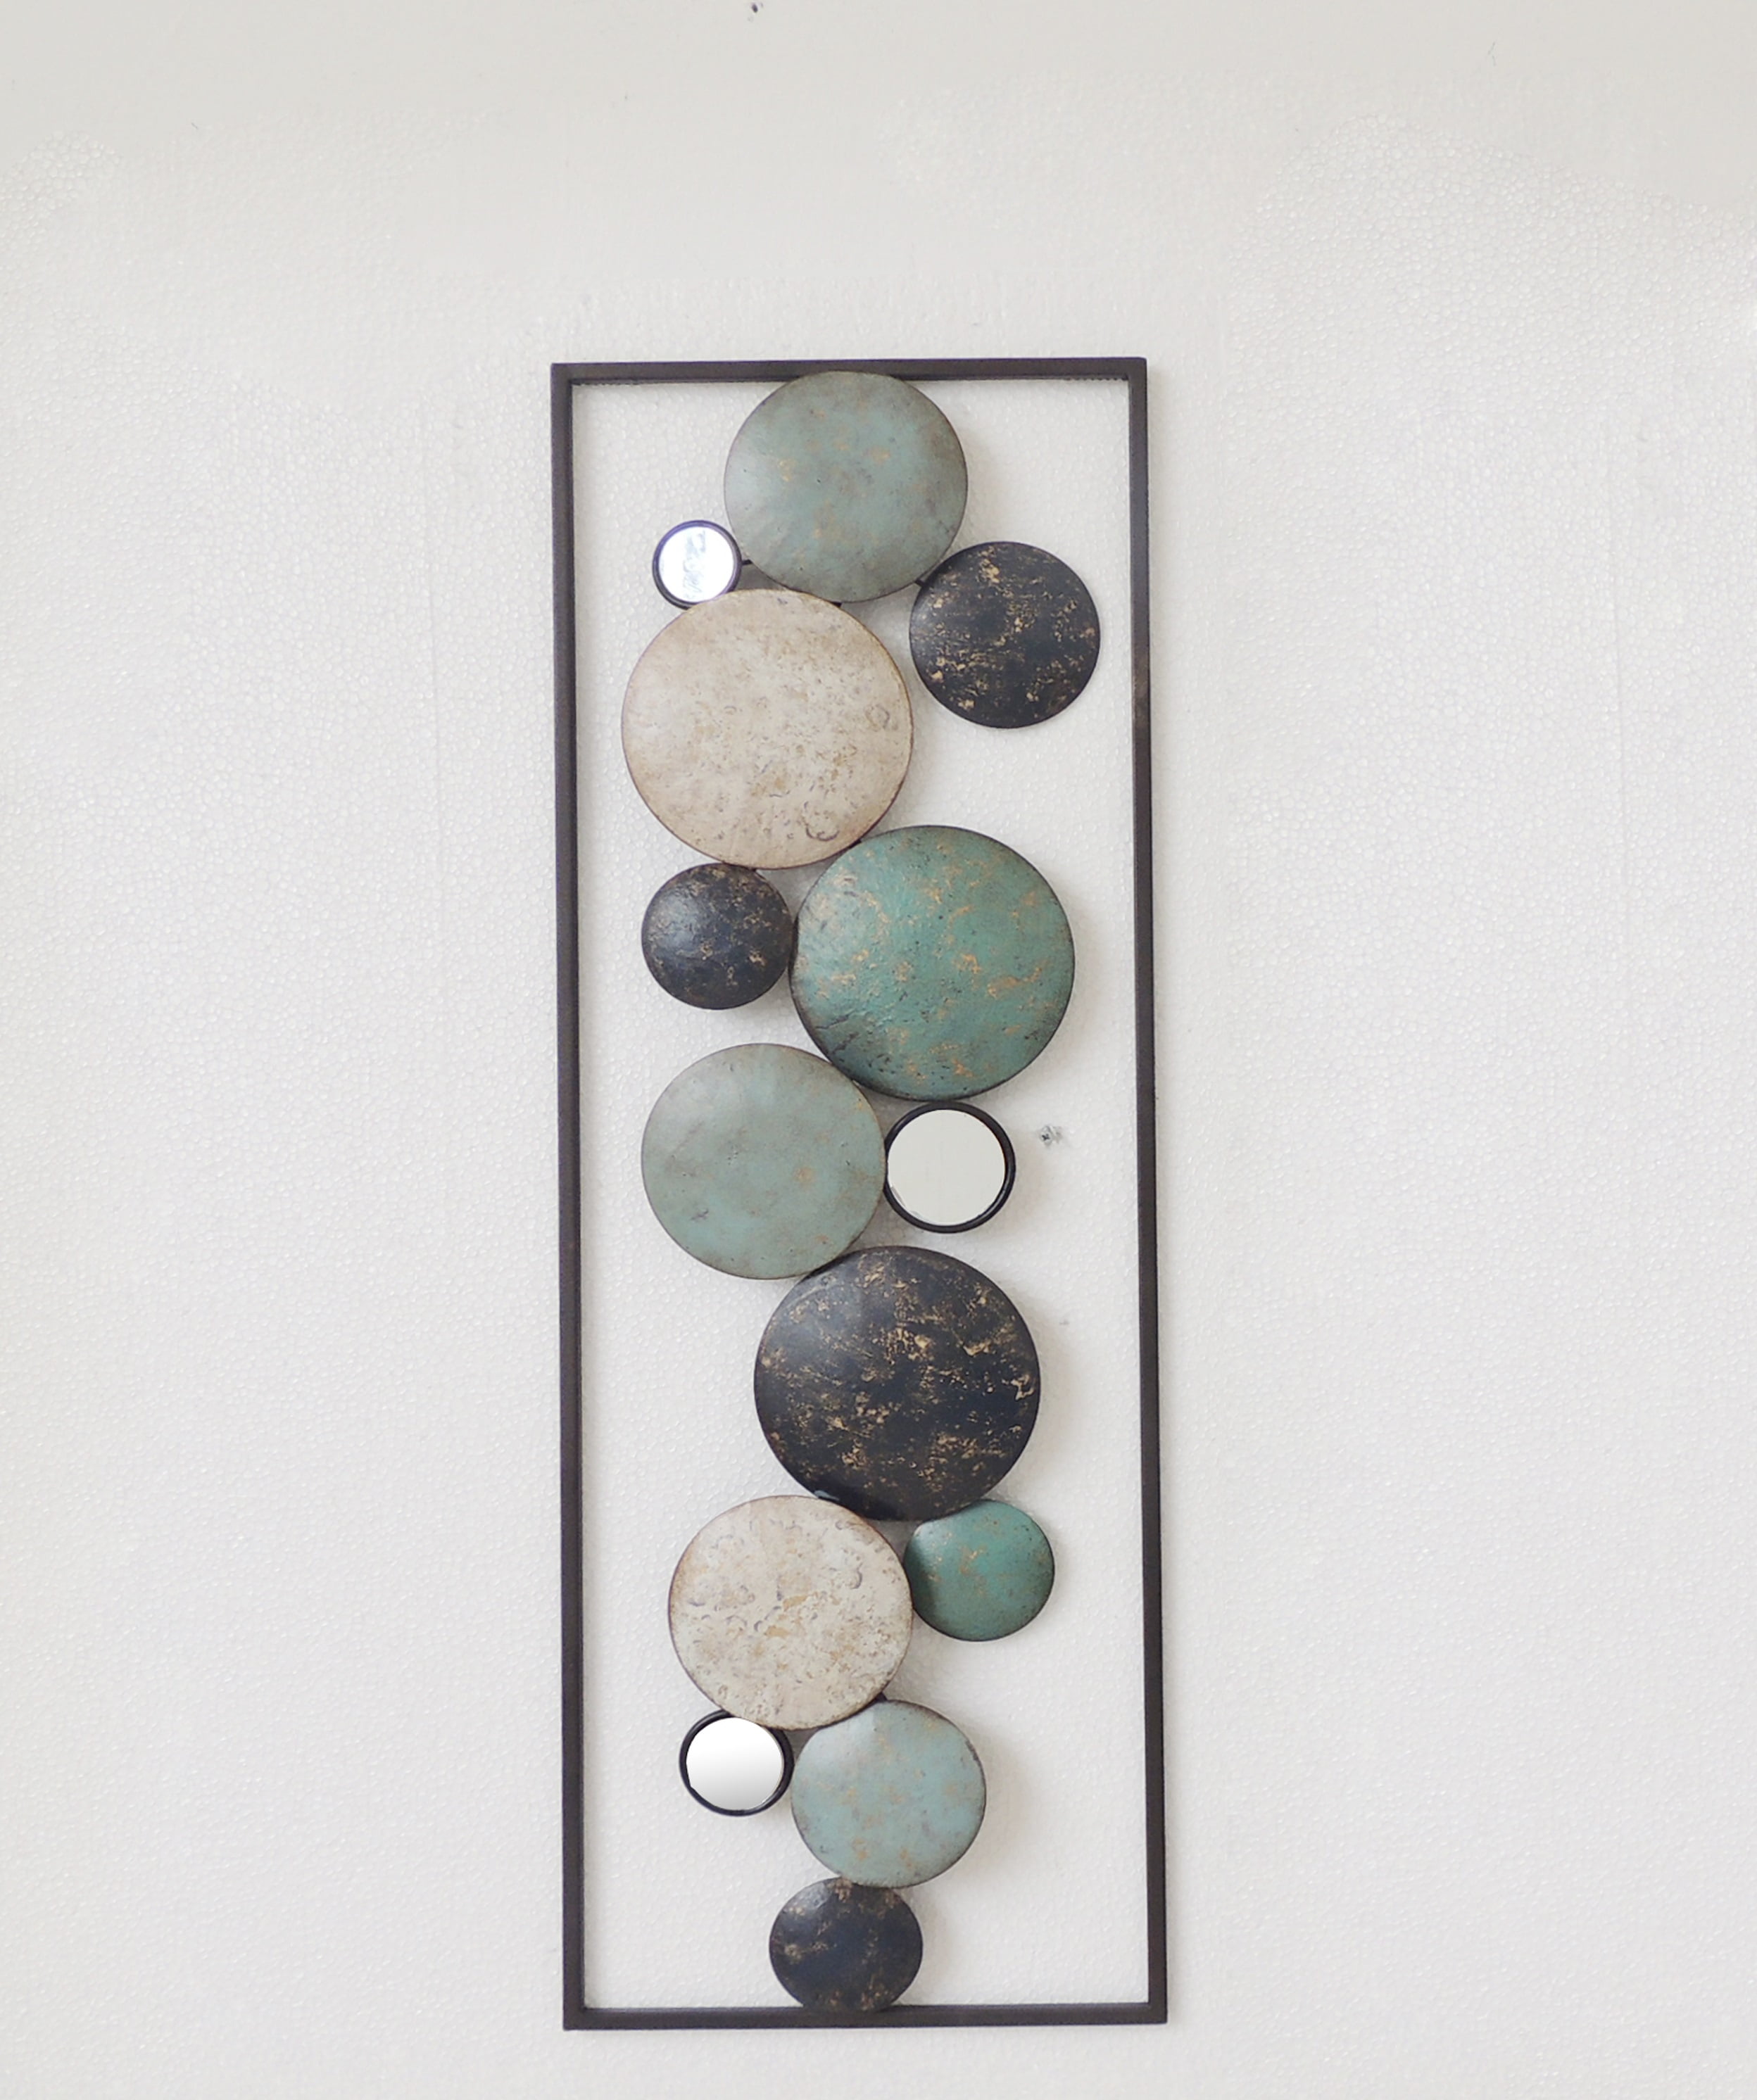 All American Collection New Modern Chic Aluminum/Metal Wall Decor with Frame 12x36 Aqua/Grey/Beige Circles 